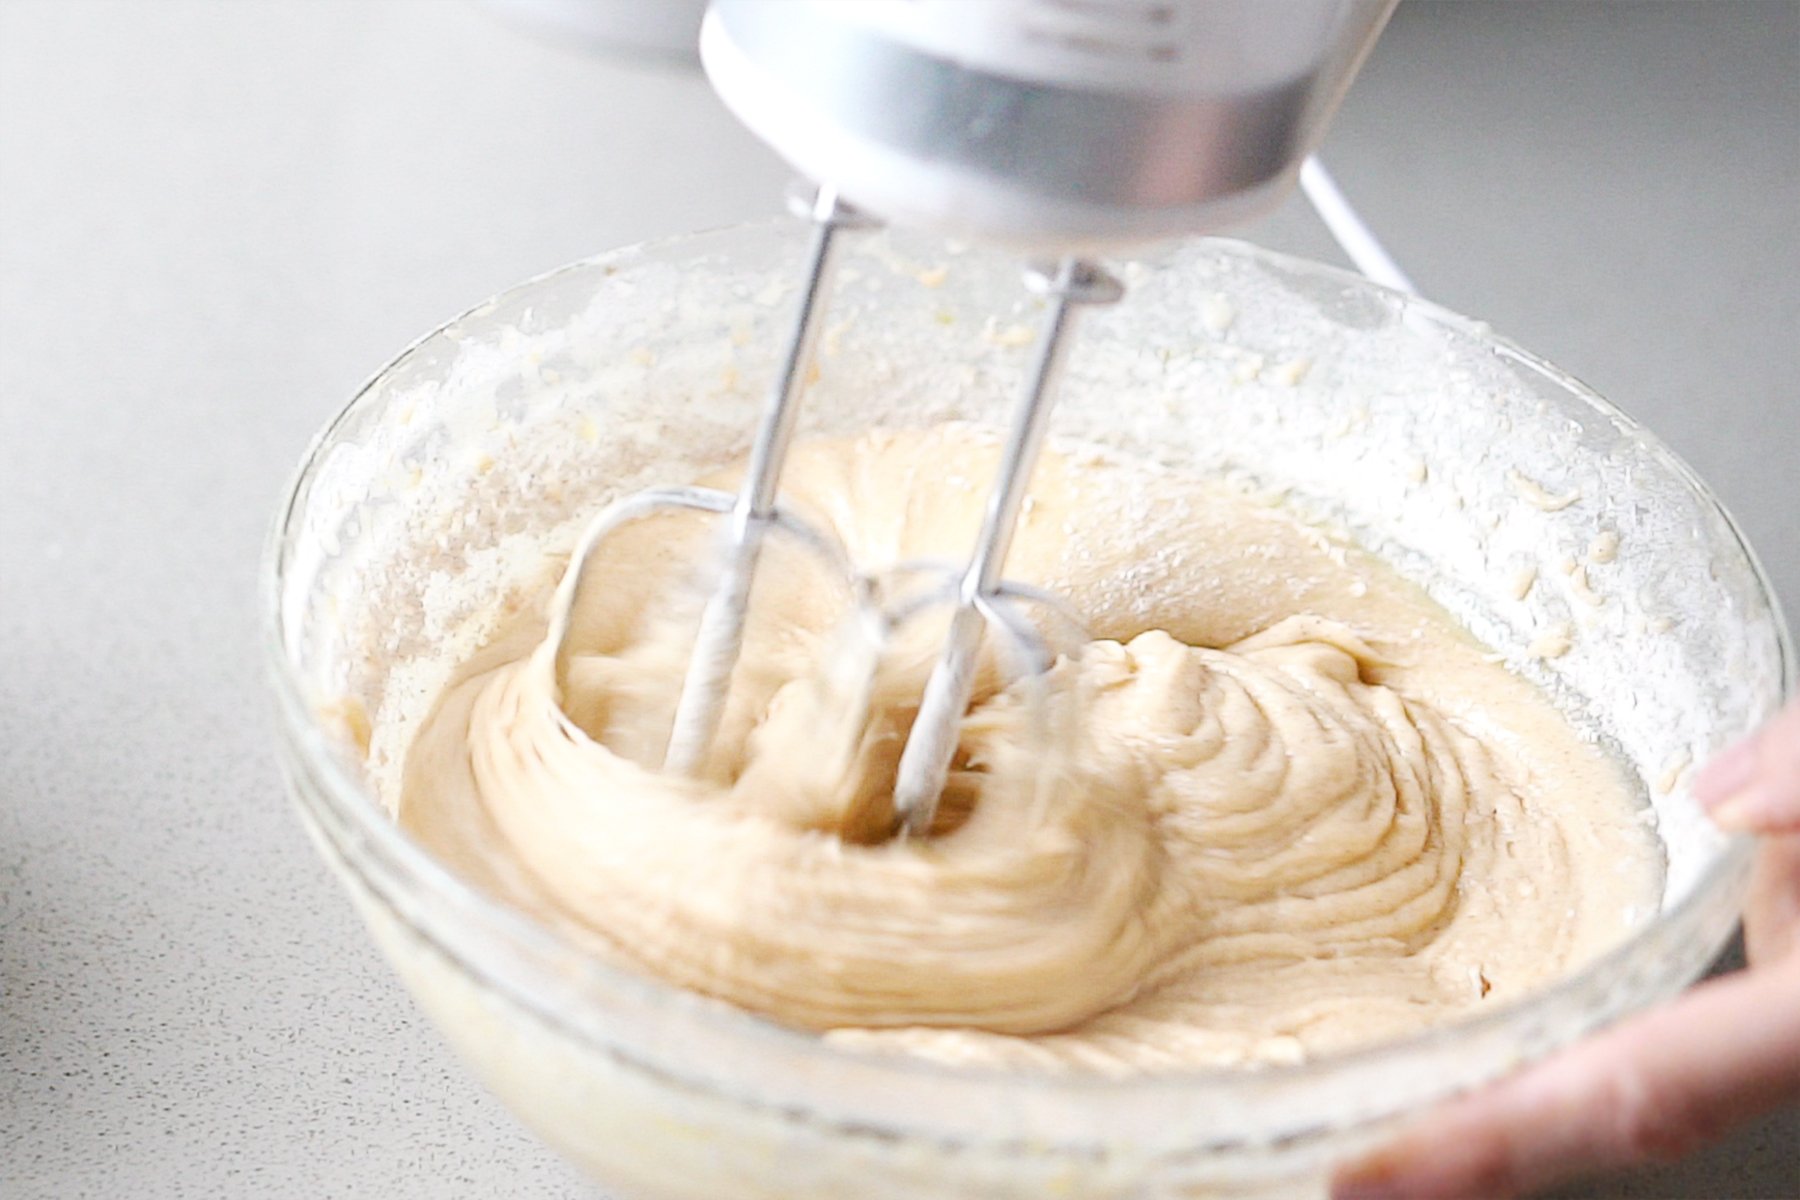 Mixing batter with a hand mixer